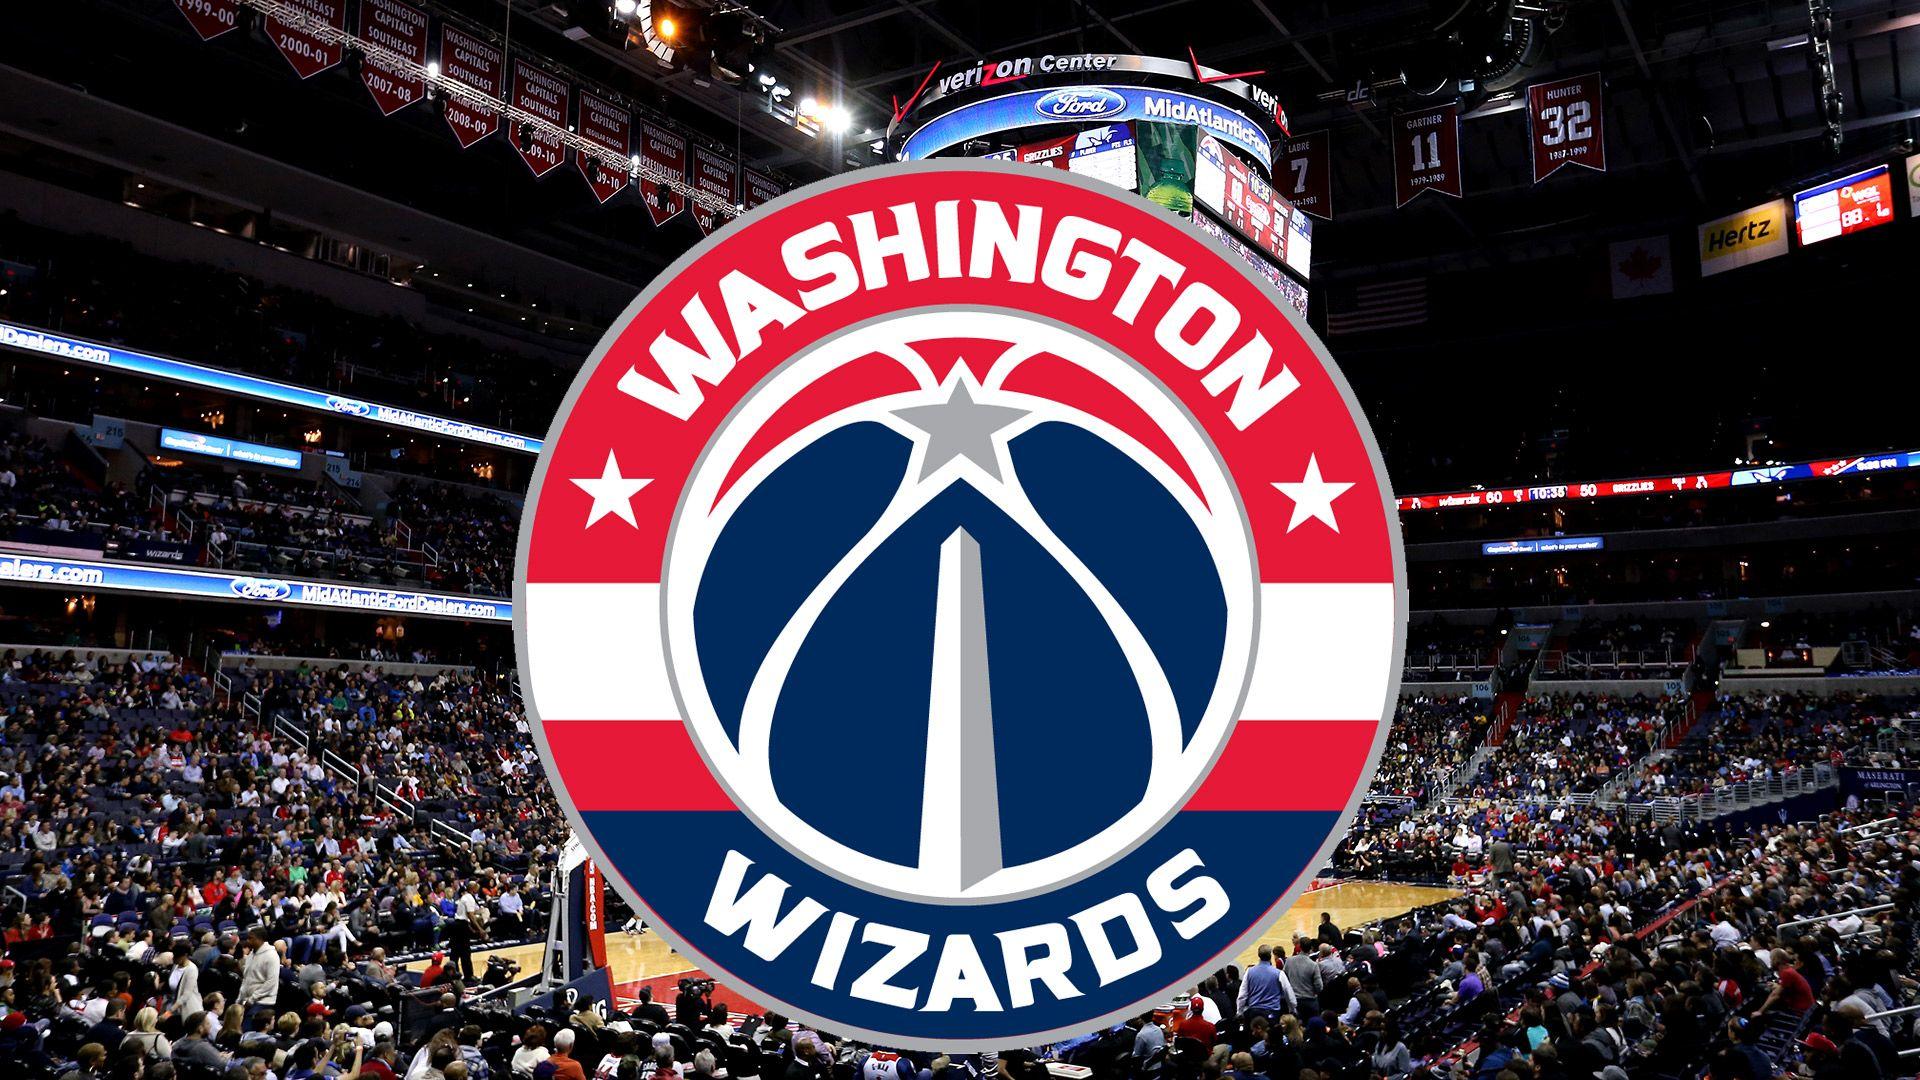 Know your NBA playoff team visual history, Wizards edition. NBA